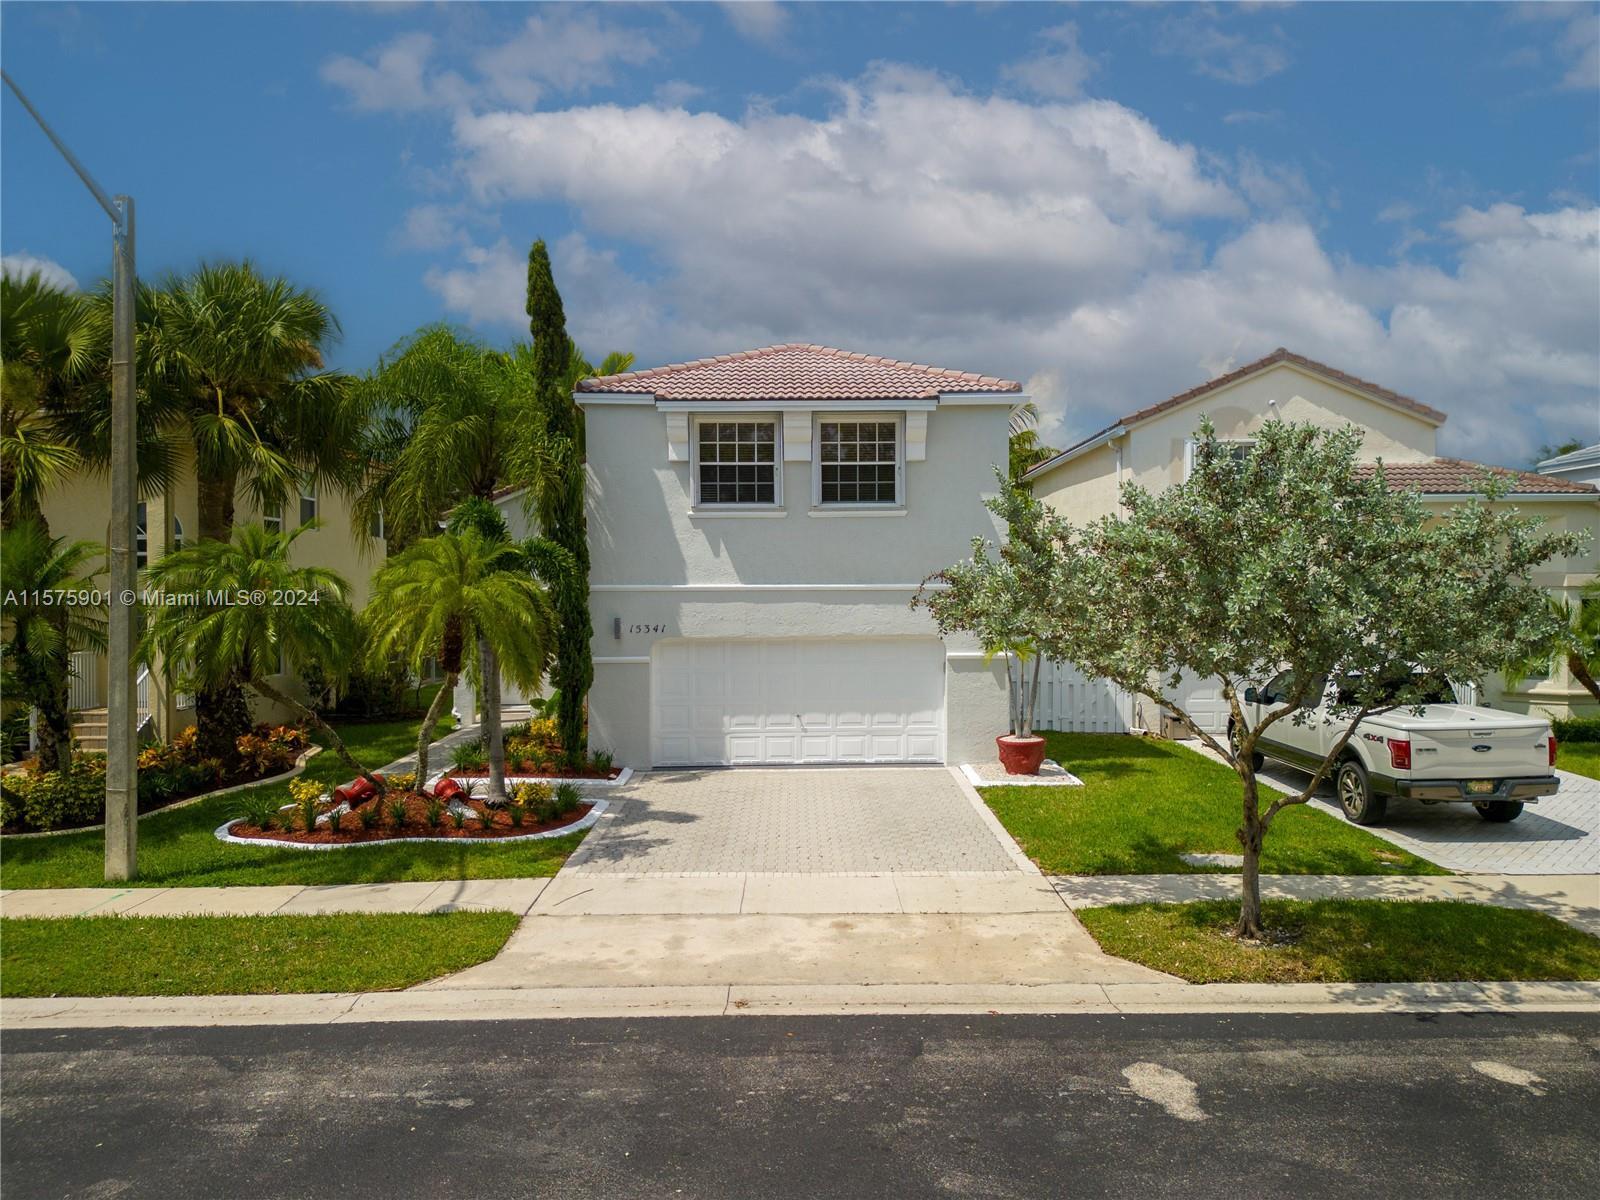 Photo of 15341 NW 4 St in Pembroke Pines, FL